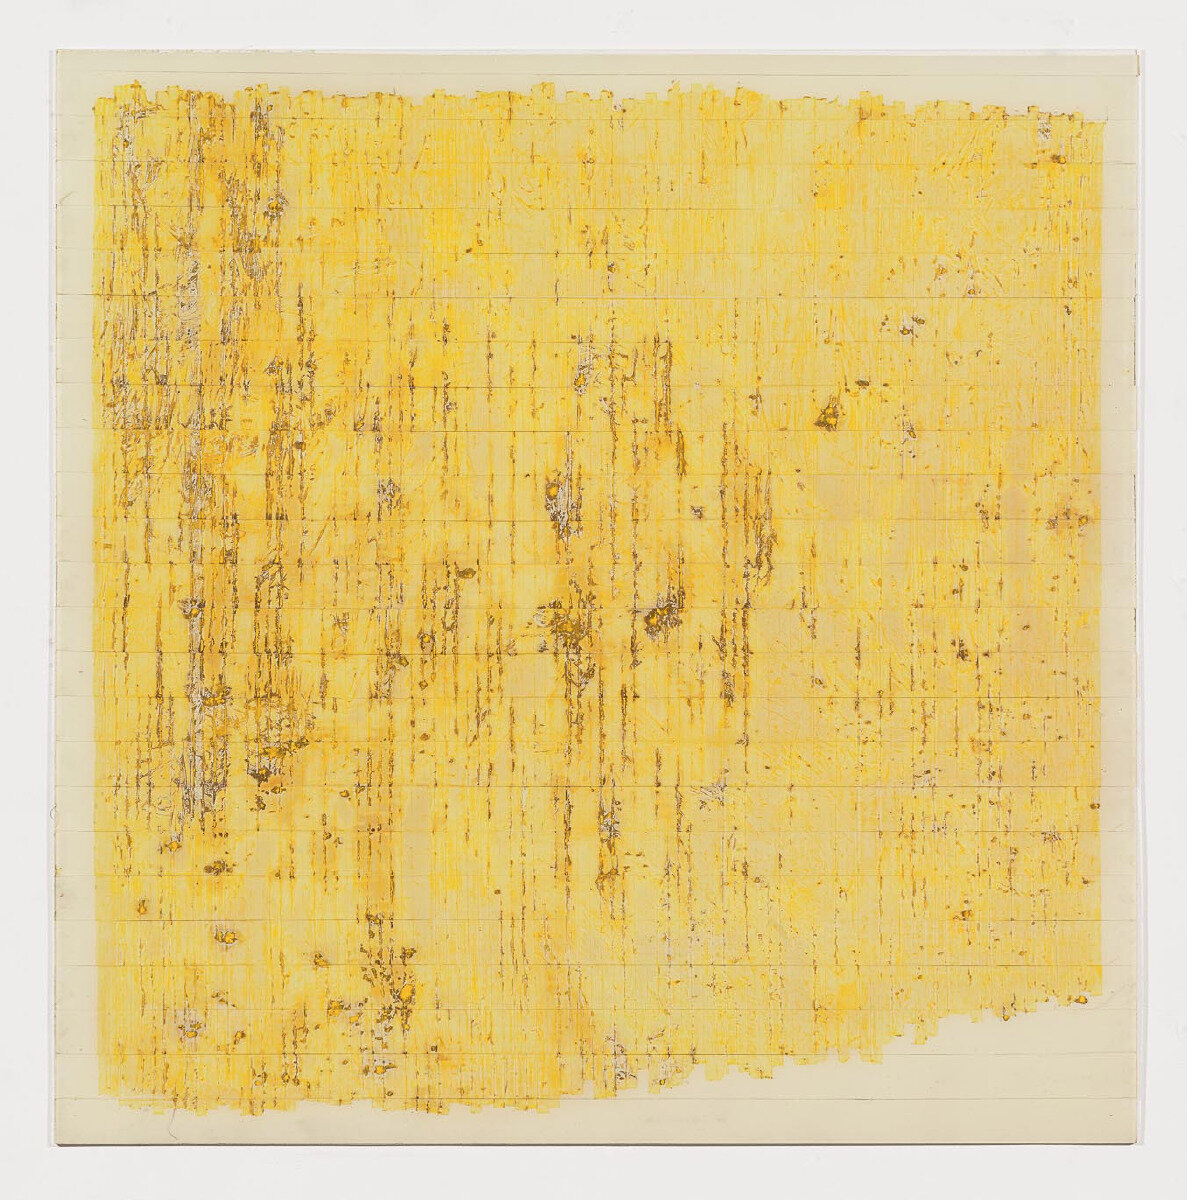  Untitled 1 of 2, 1978, 49 x 48.5 inches, pastel and tape on Plexiglass 